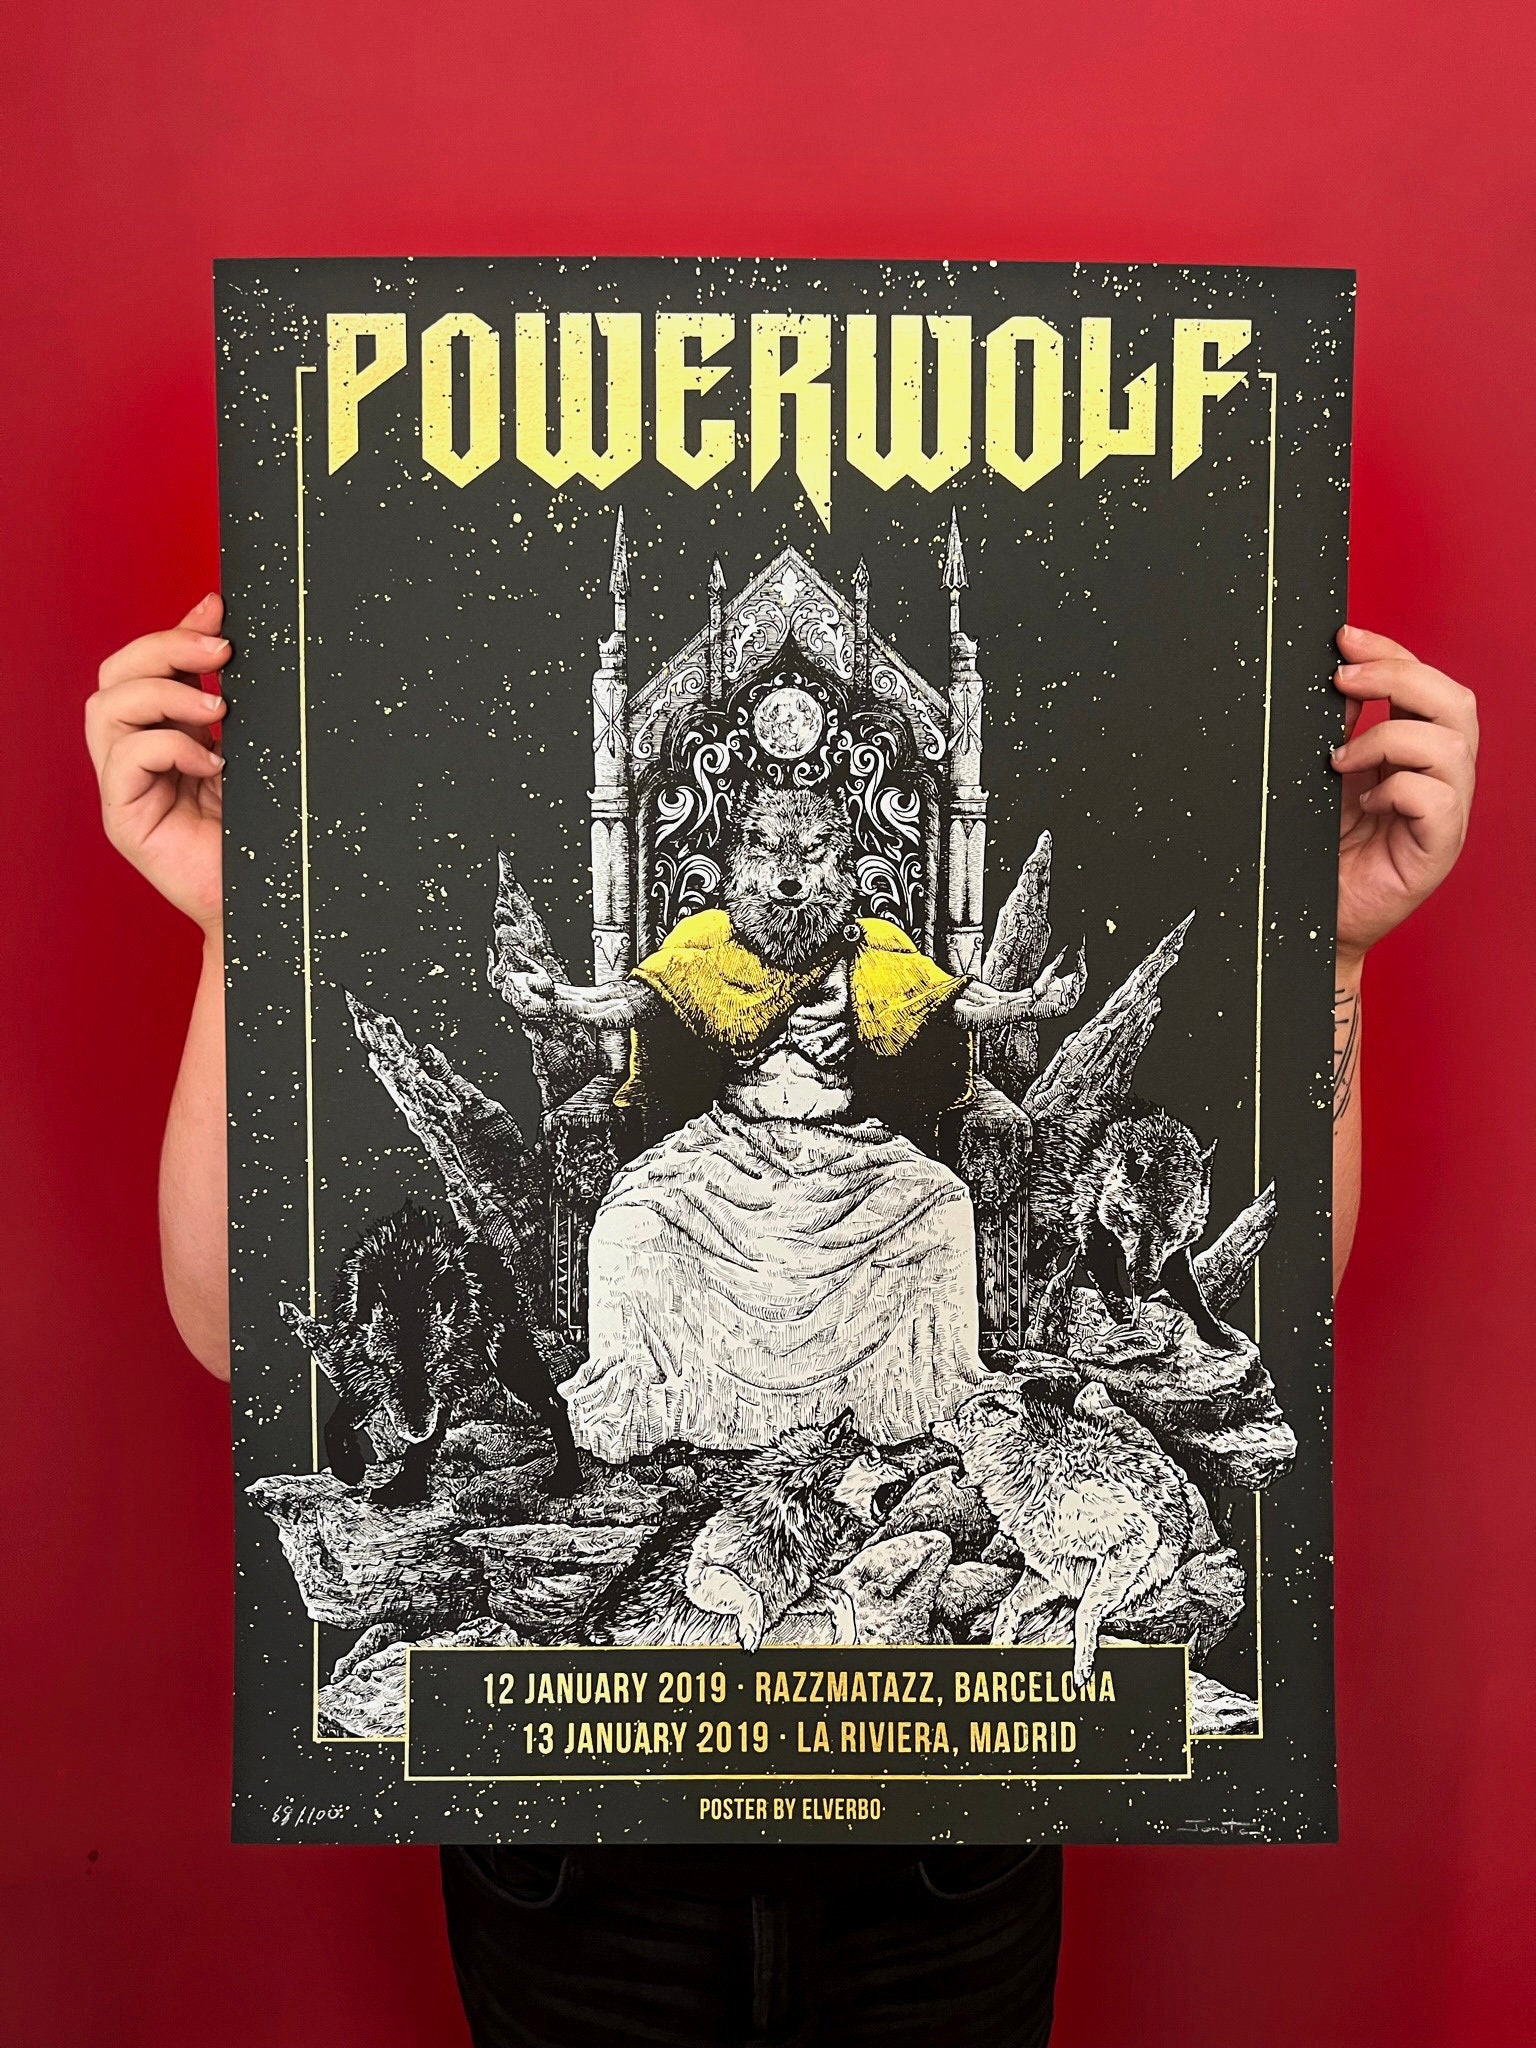 Powerwolf - Wolves, are there any stories and topics you